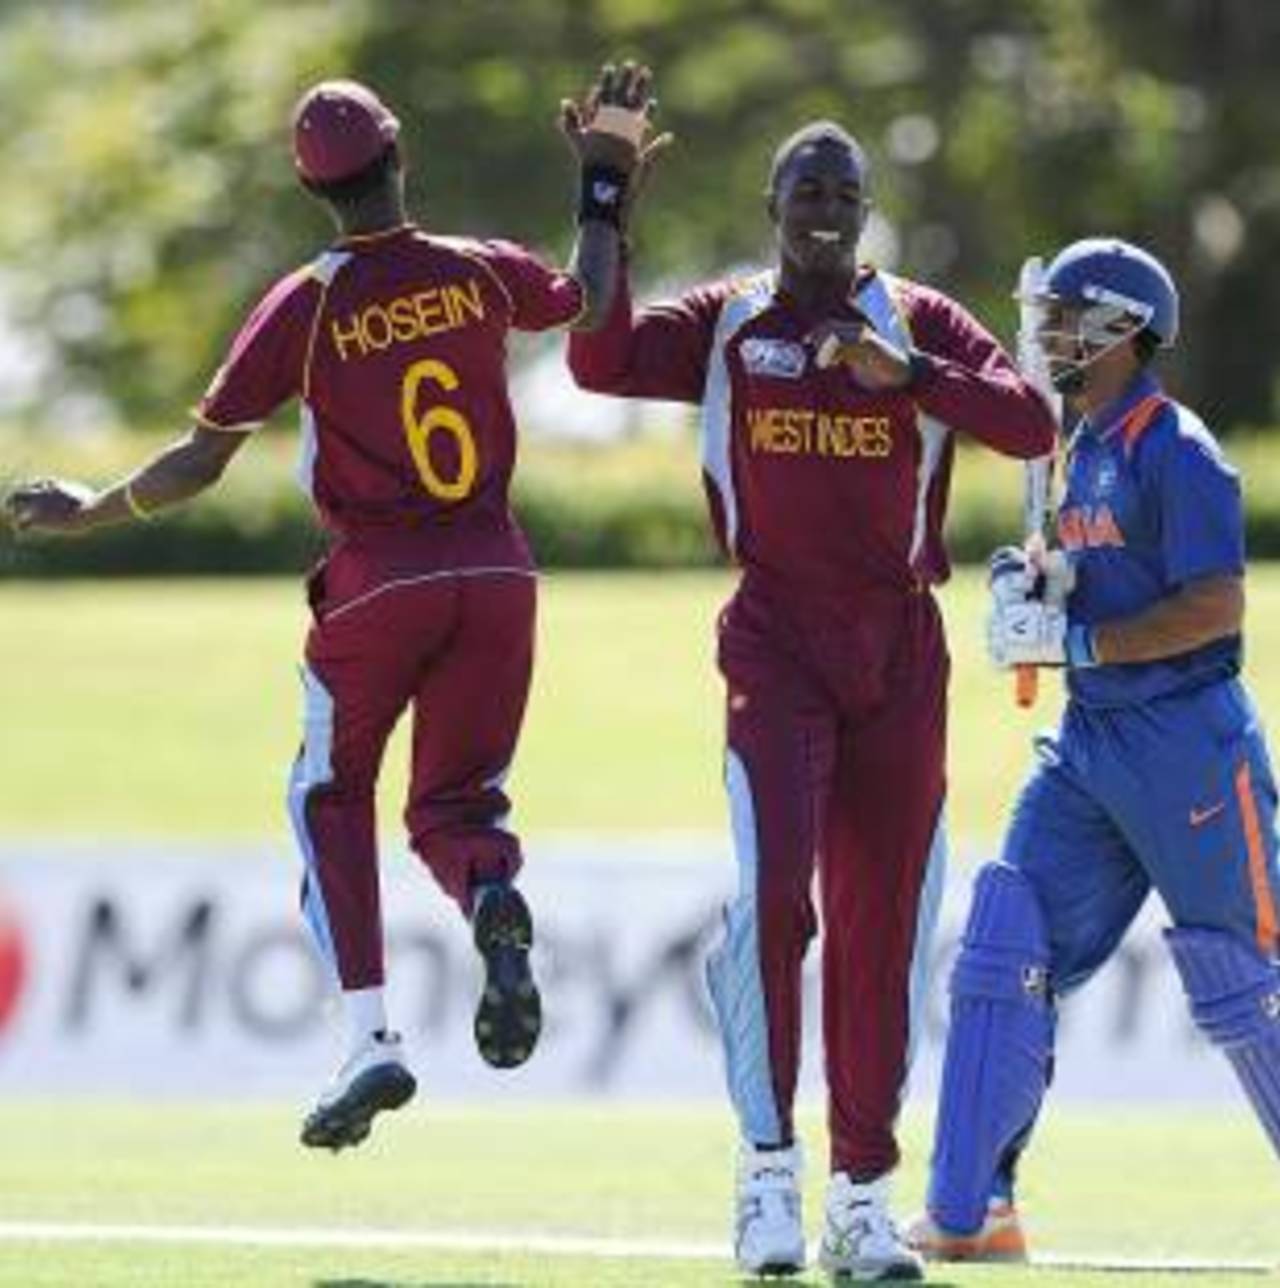 The West Indian bowlers were put under a rigorous fitness plan and the results are showing&nbsp;&nbsp;&bull;&nbsp;&nbsp;ICC/Getty